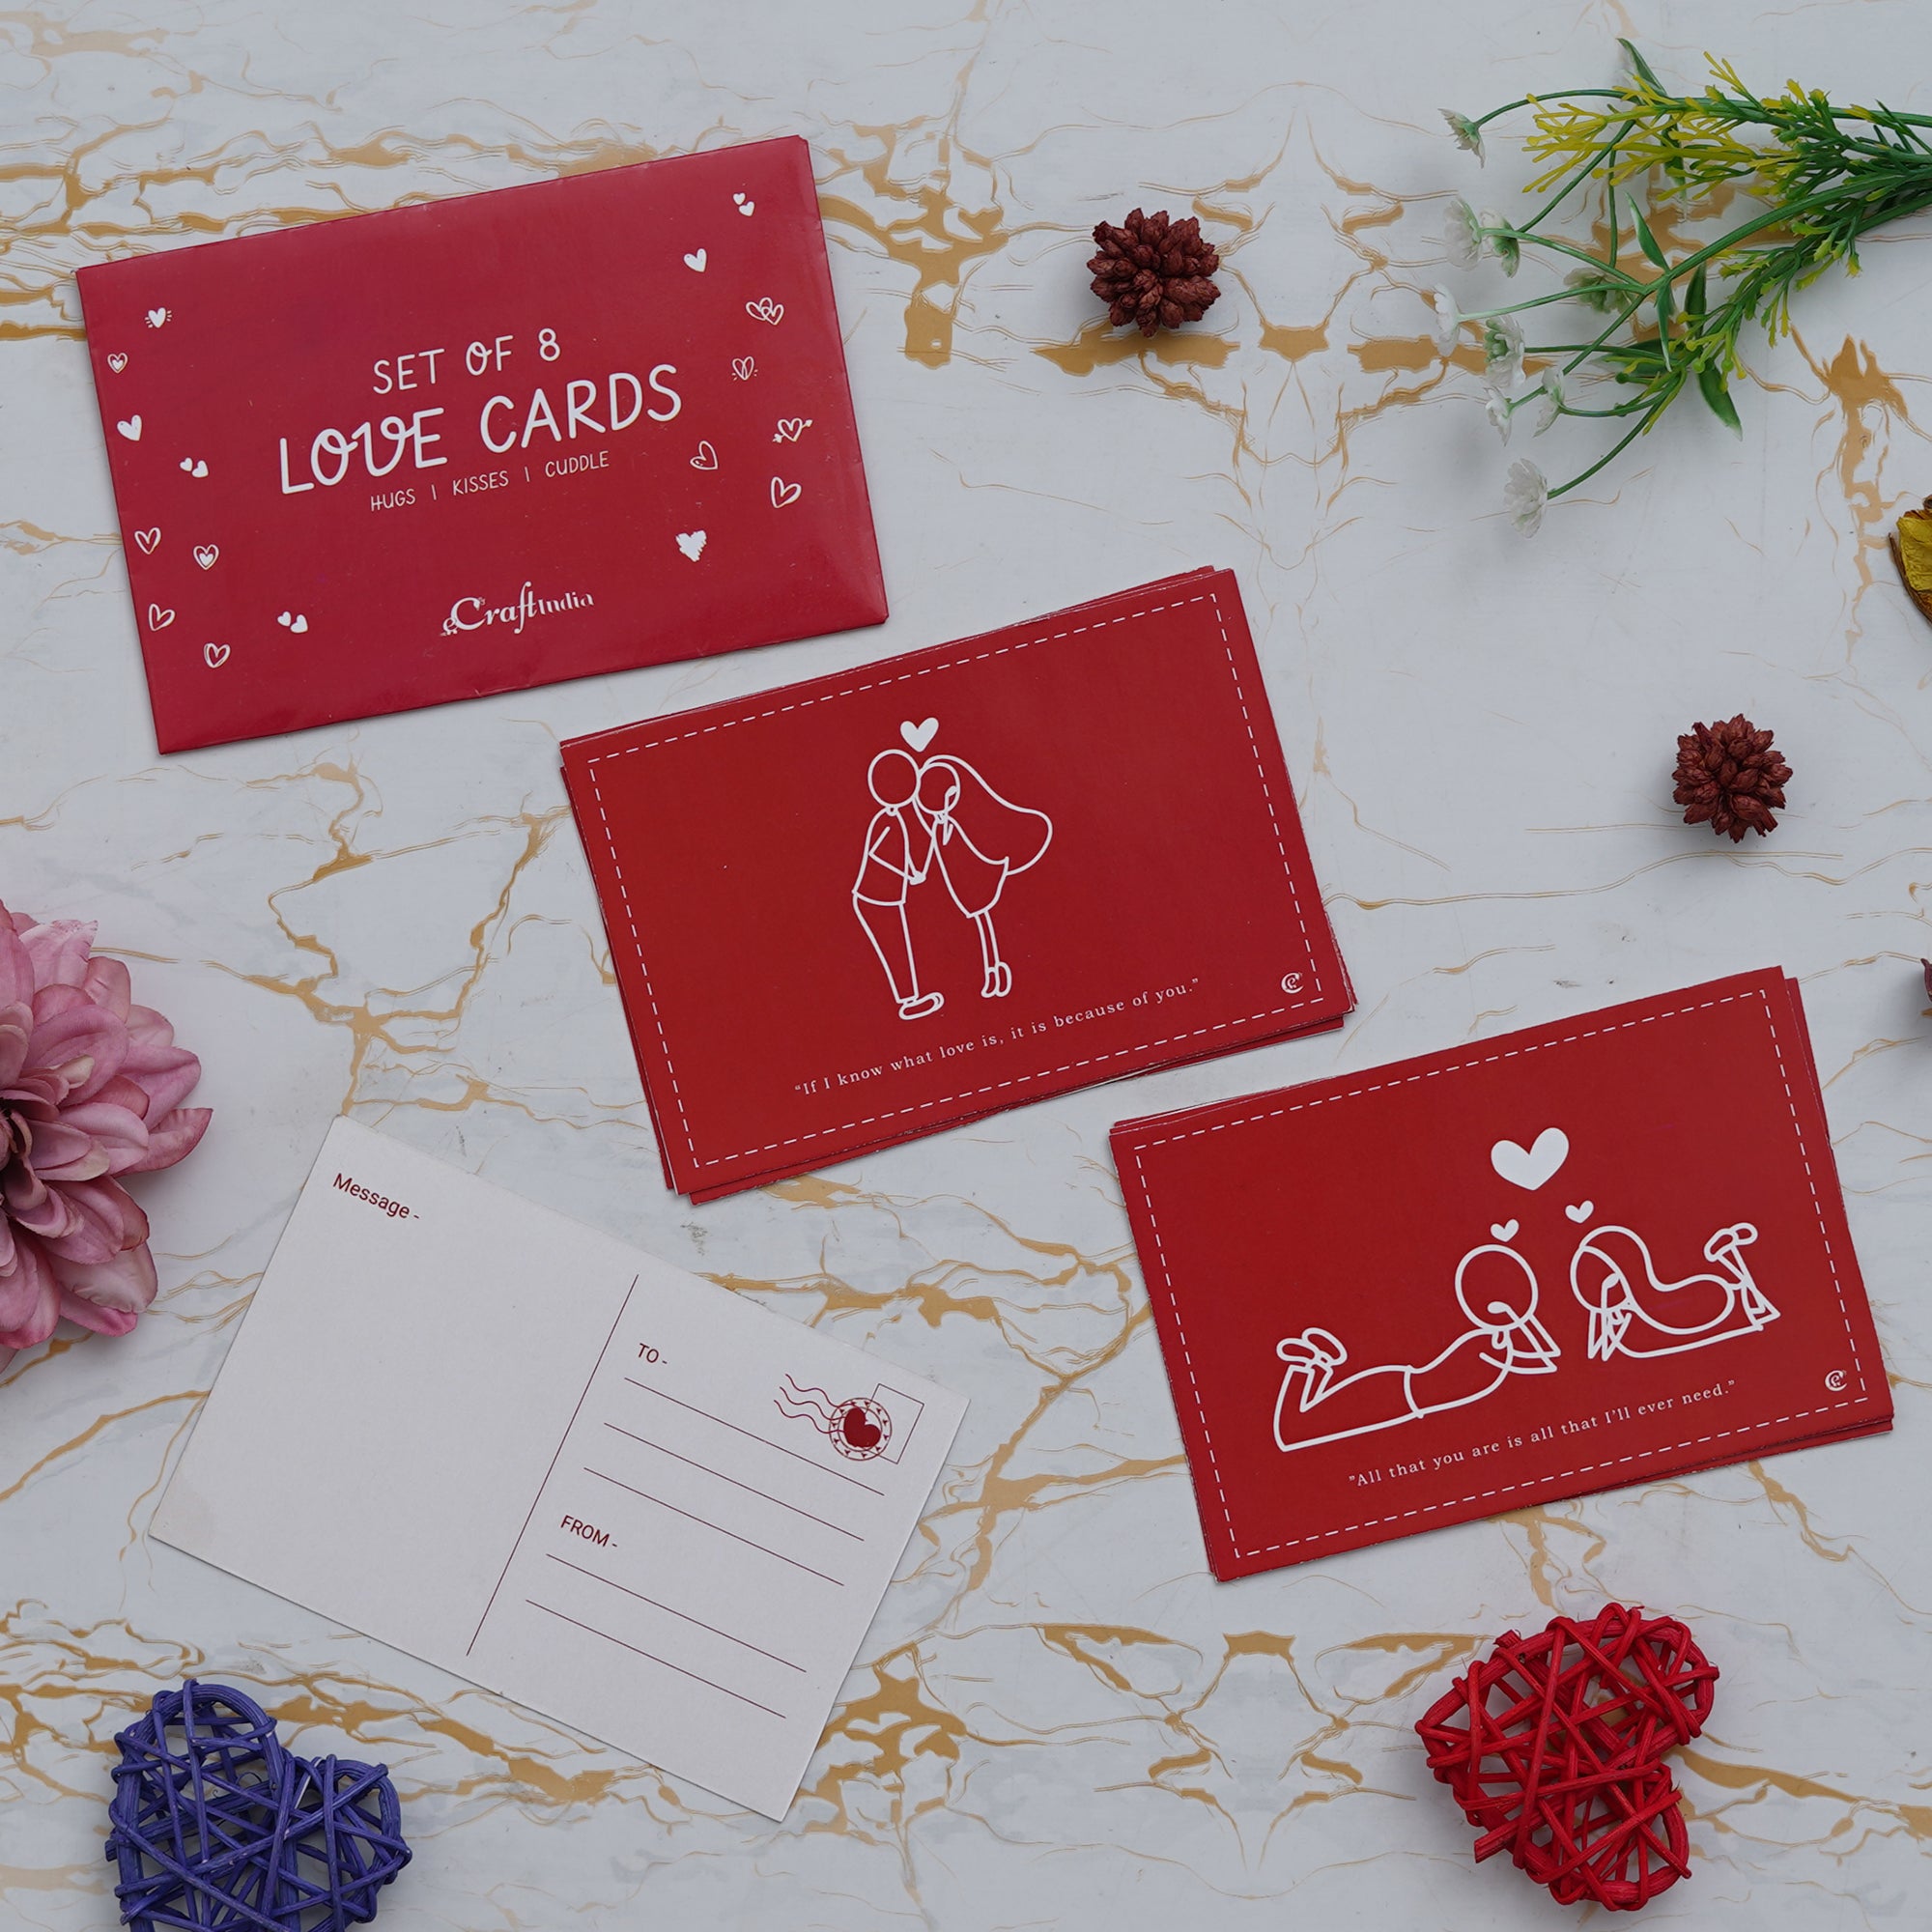 Valentine Combo of Pack of 8 Love Gift Cards, Hands Showcasing Red Heart Gift Set, Red Roses Bouquet and White, Red Teddy Bear Valentine's Rectangle Shaped Gift Box 1